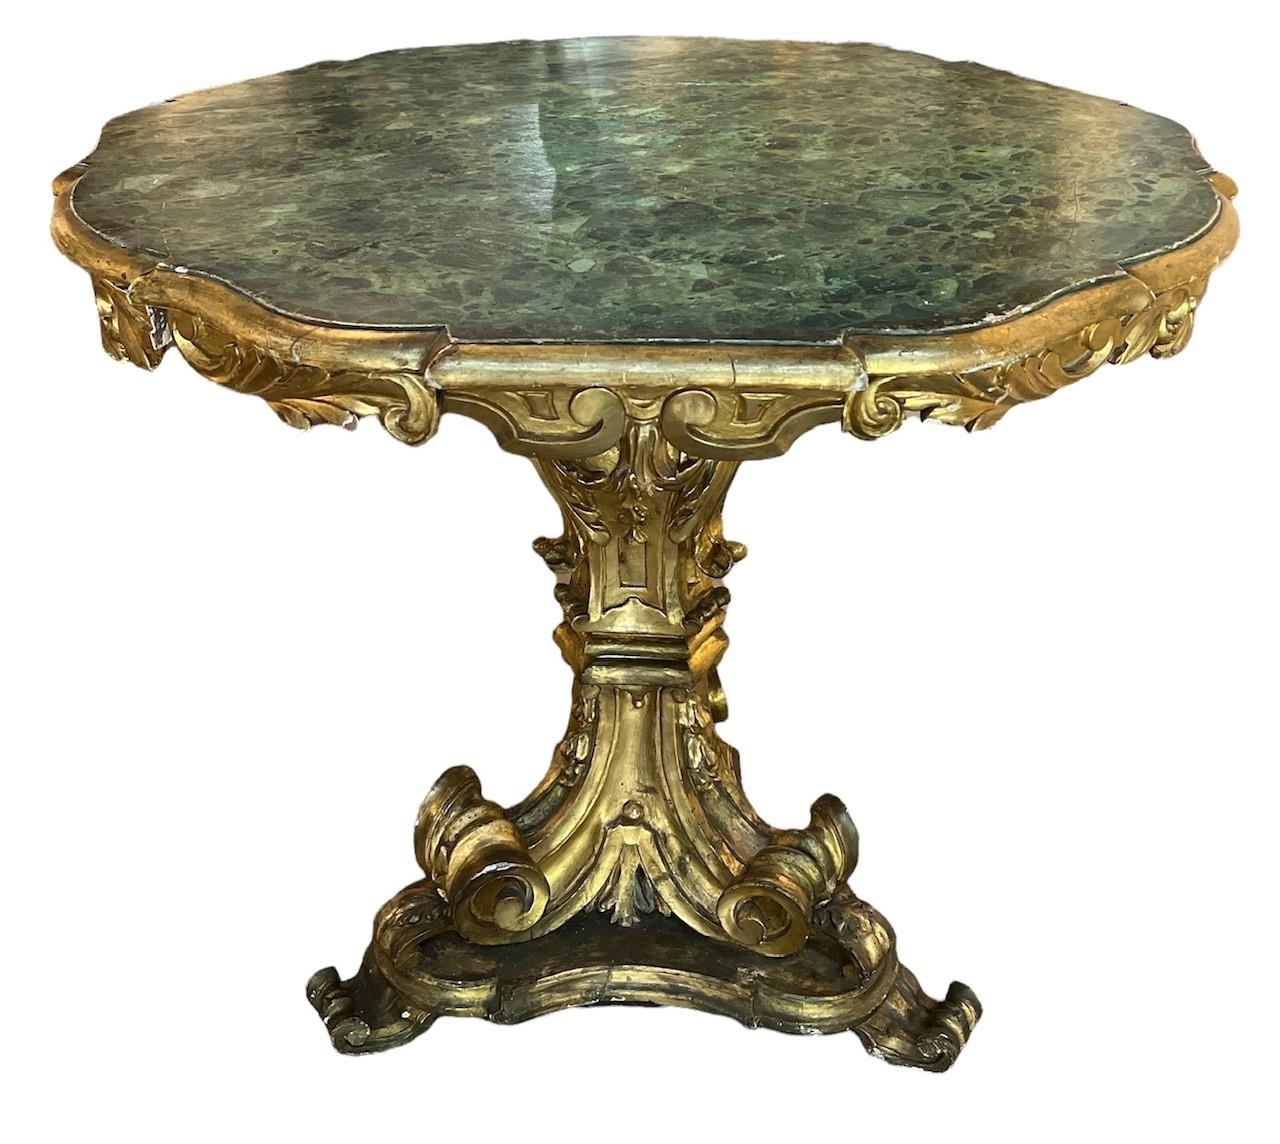 AN EARLY 19TH CENTURY AND LATER ROCOCO GILTWOOD CENTRE TABLE The circular green faux marble top